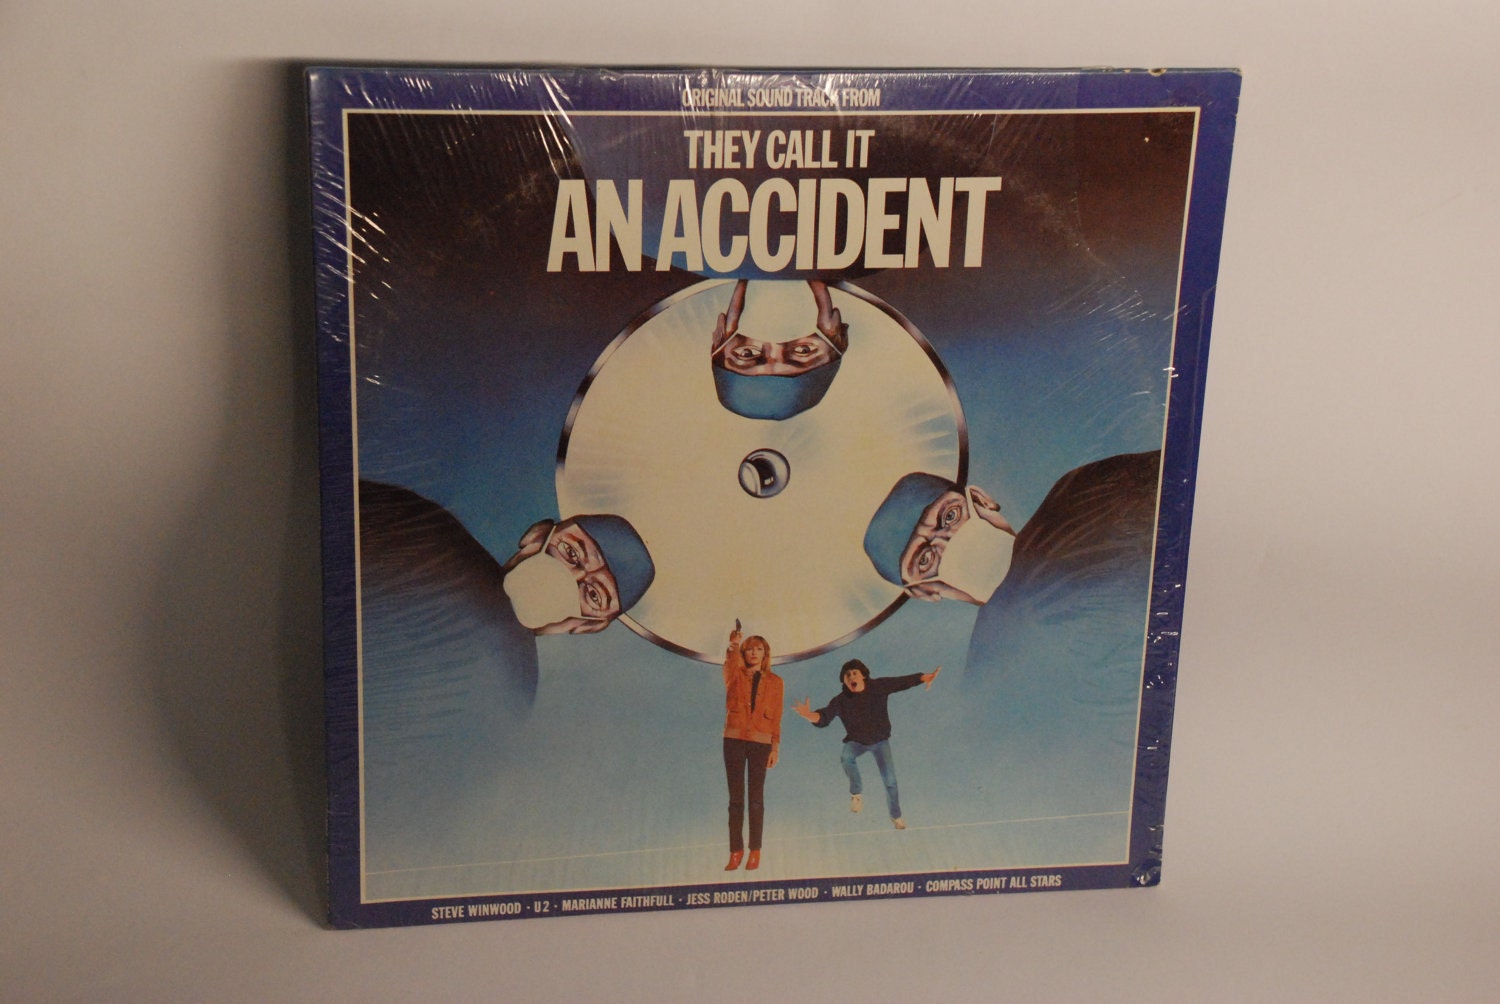 SPRING SALE They Call It An Accident - Original Soundtrack LP Vinyl Album Record 1982 Electronic Rock Stage and Screen